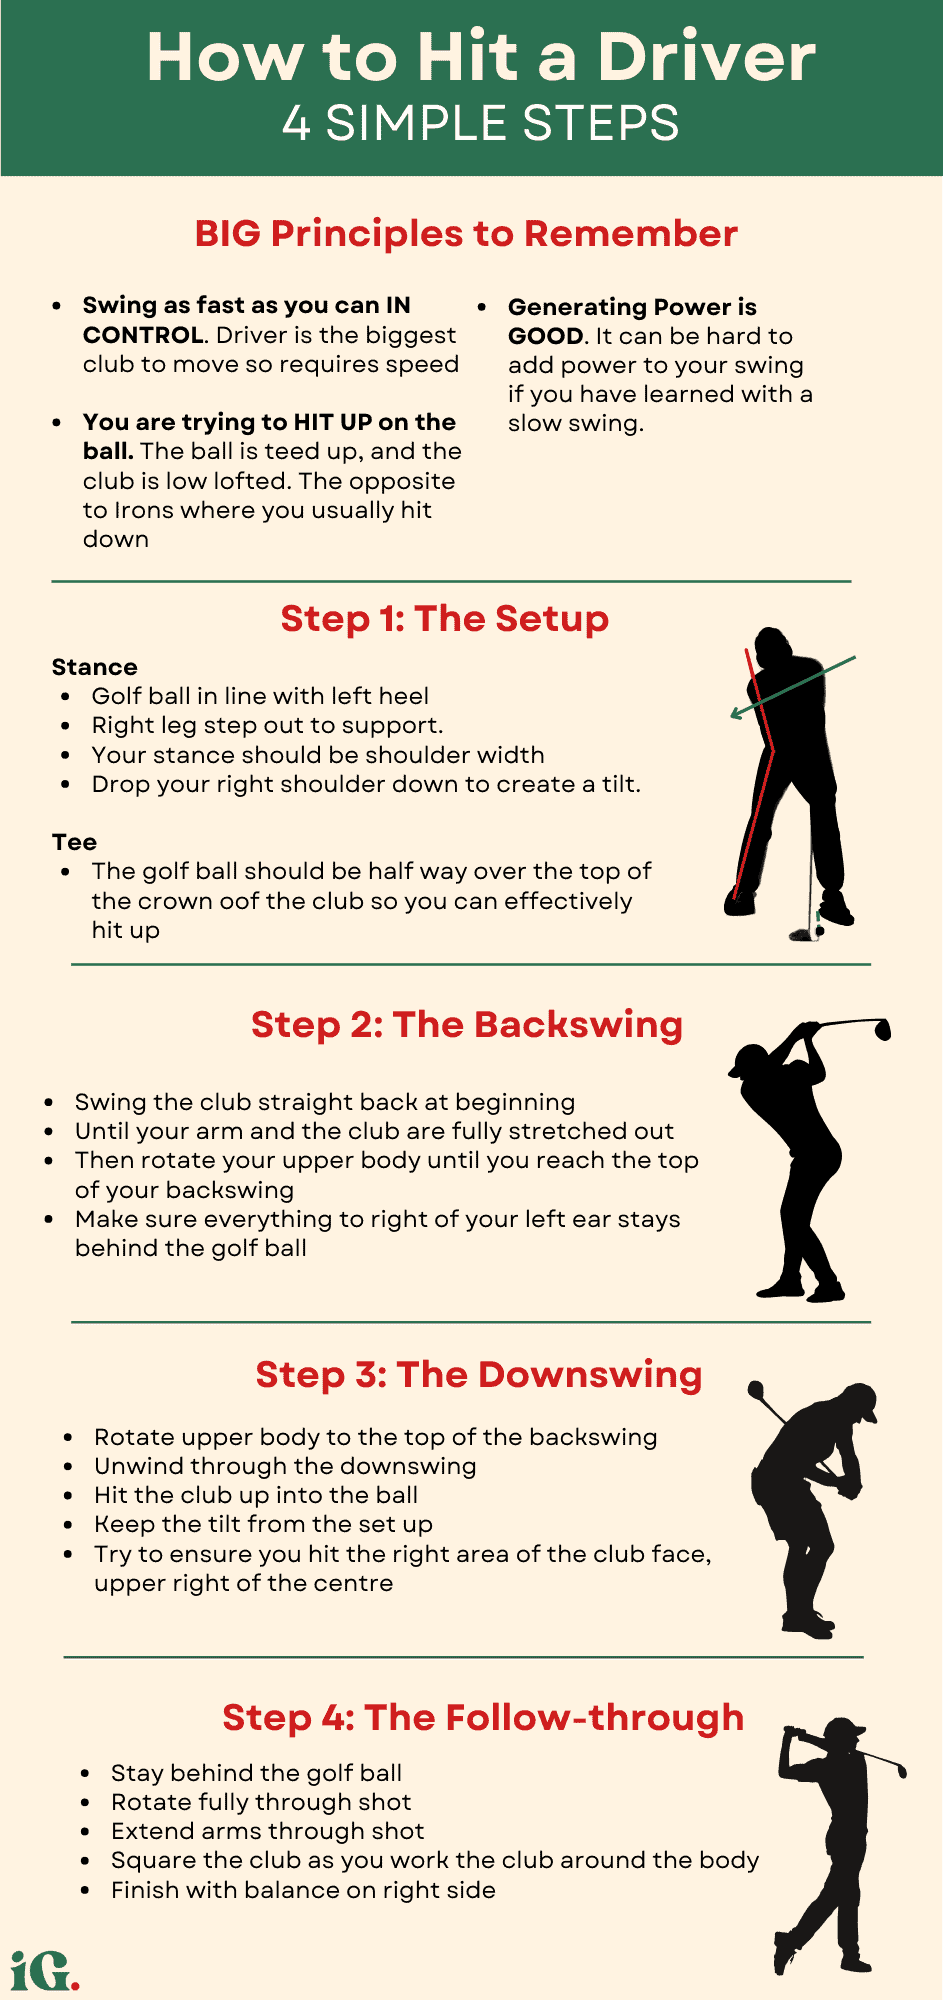 An infographic showing the four simple steps to hitting a golf driver